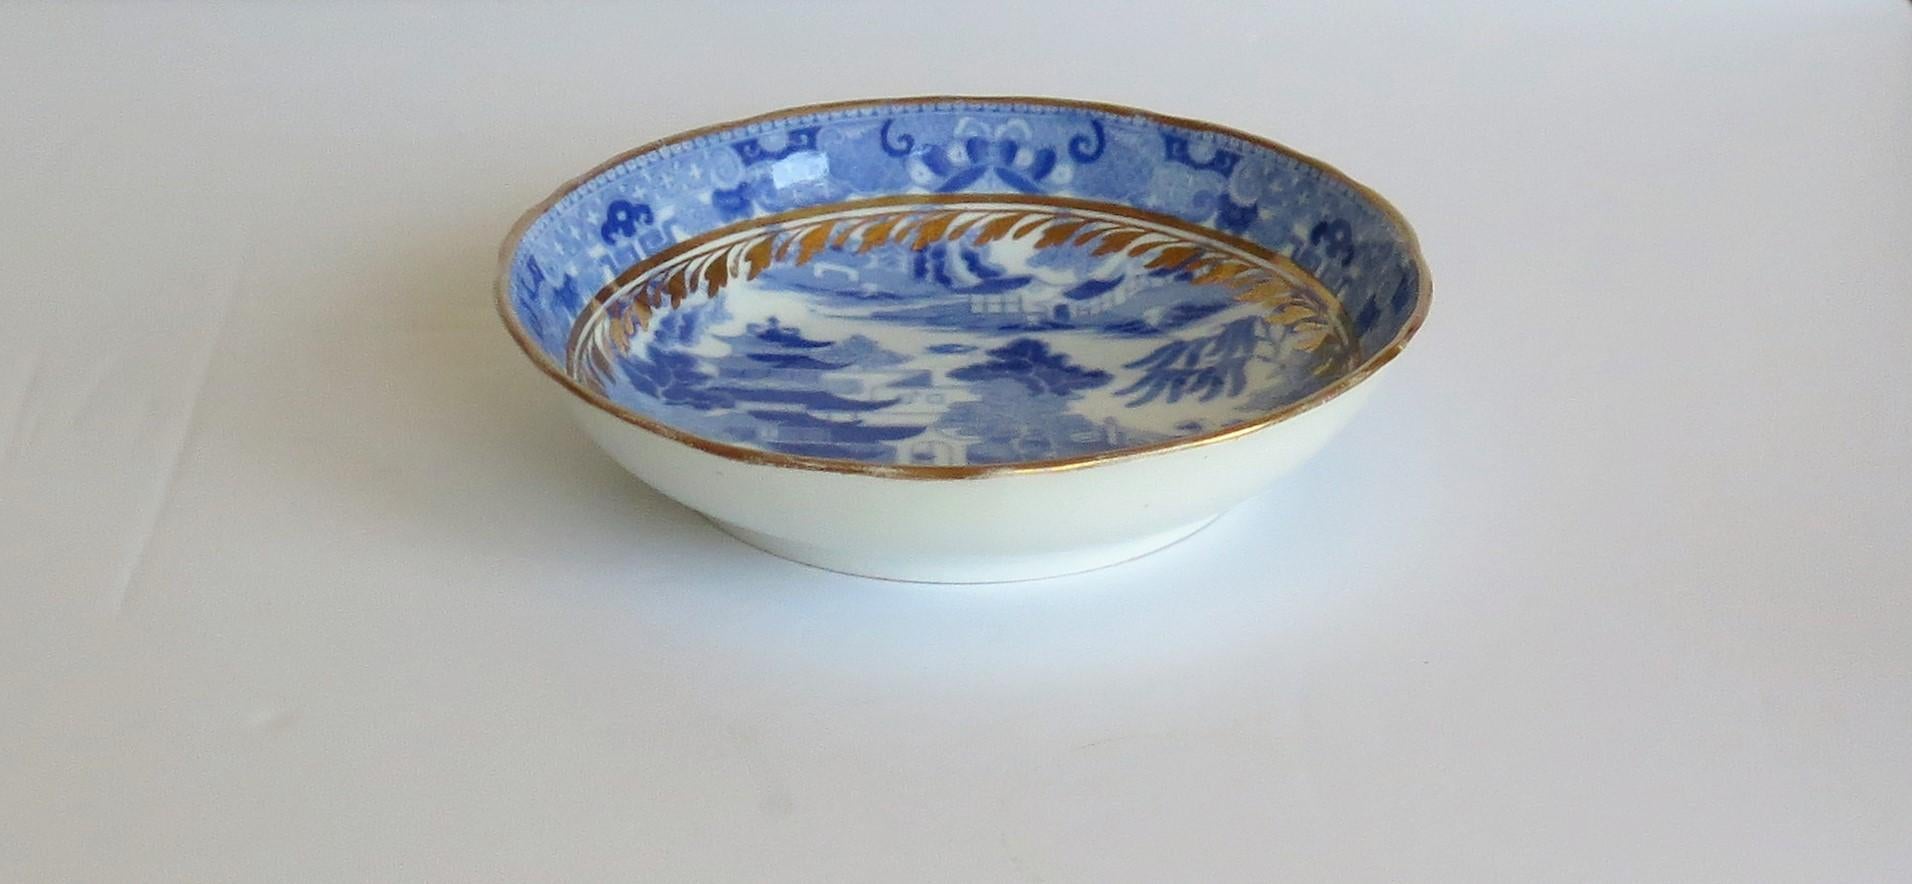 Miles Mason Porcelain Saucer Dish Blue and White Gilded Broseley Pattern Ca 1805 3